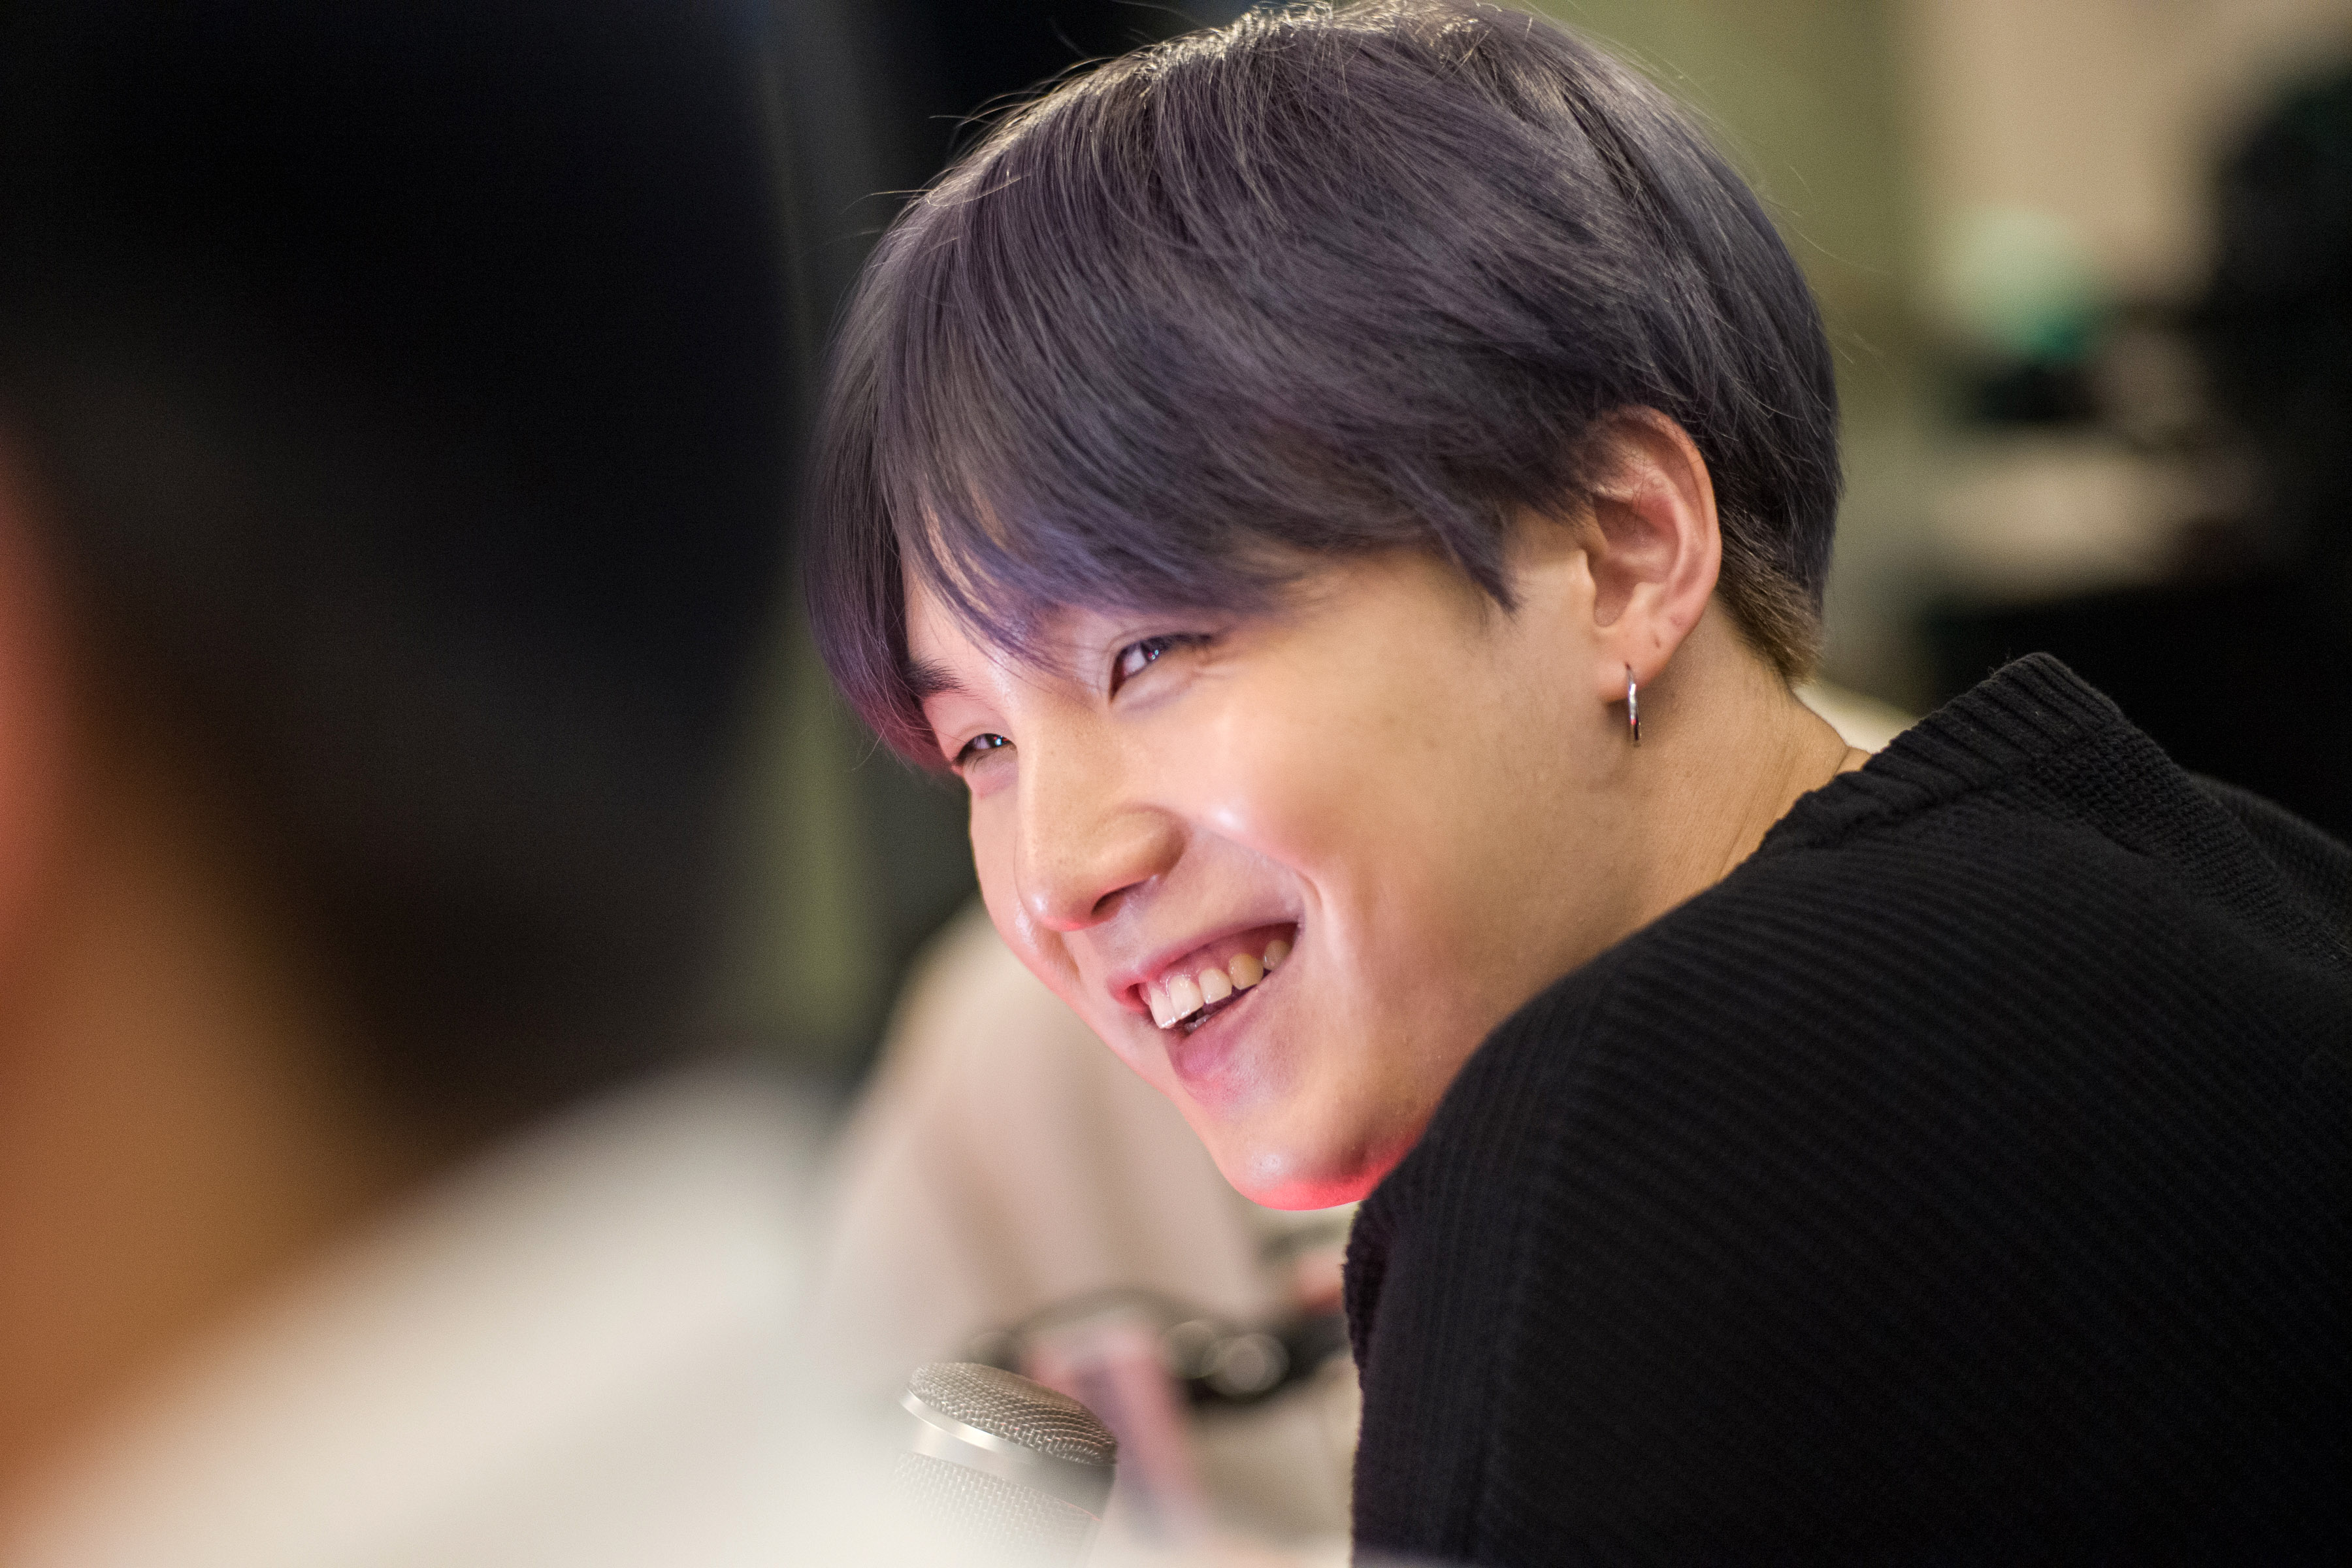 Suga of BTS visits The Elvis Duran Z100 Morning Show in 2019